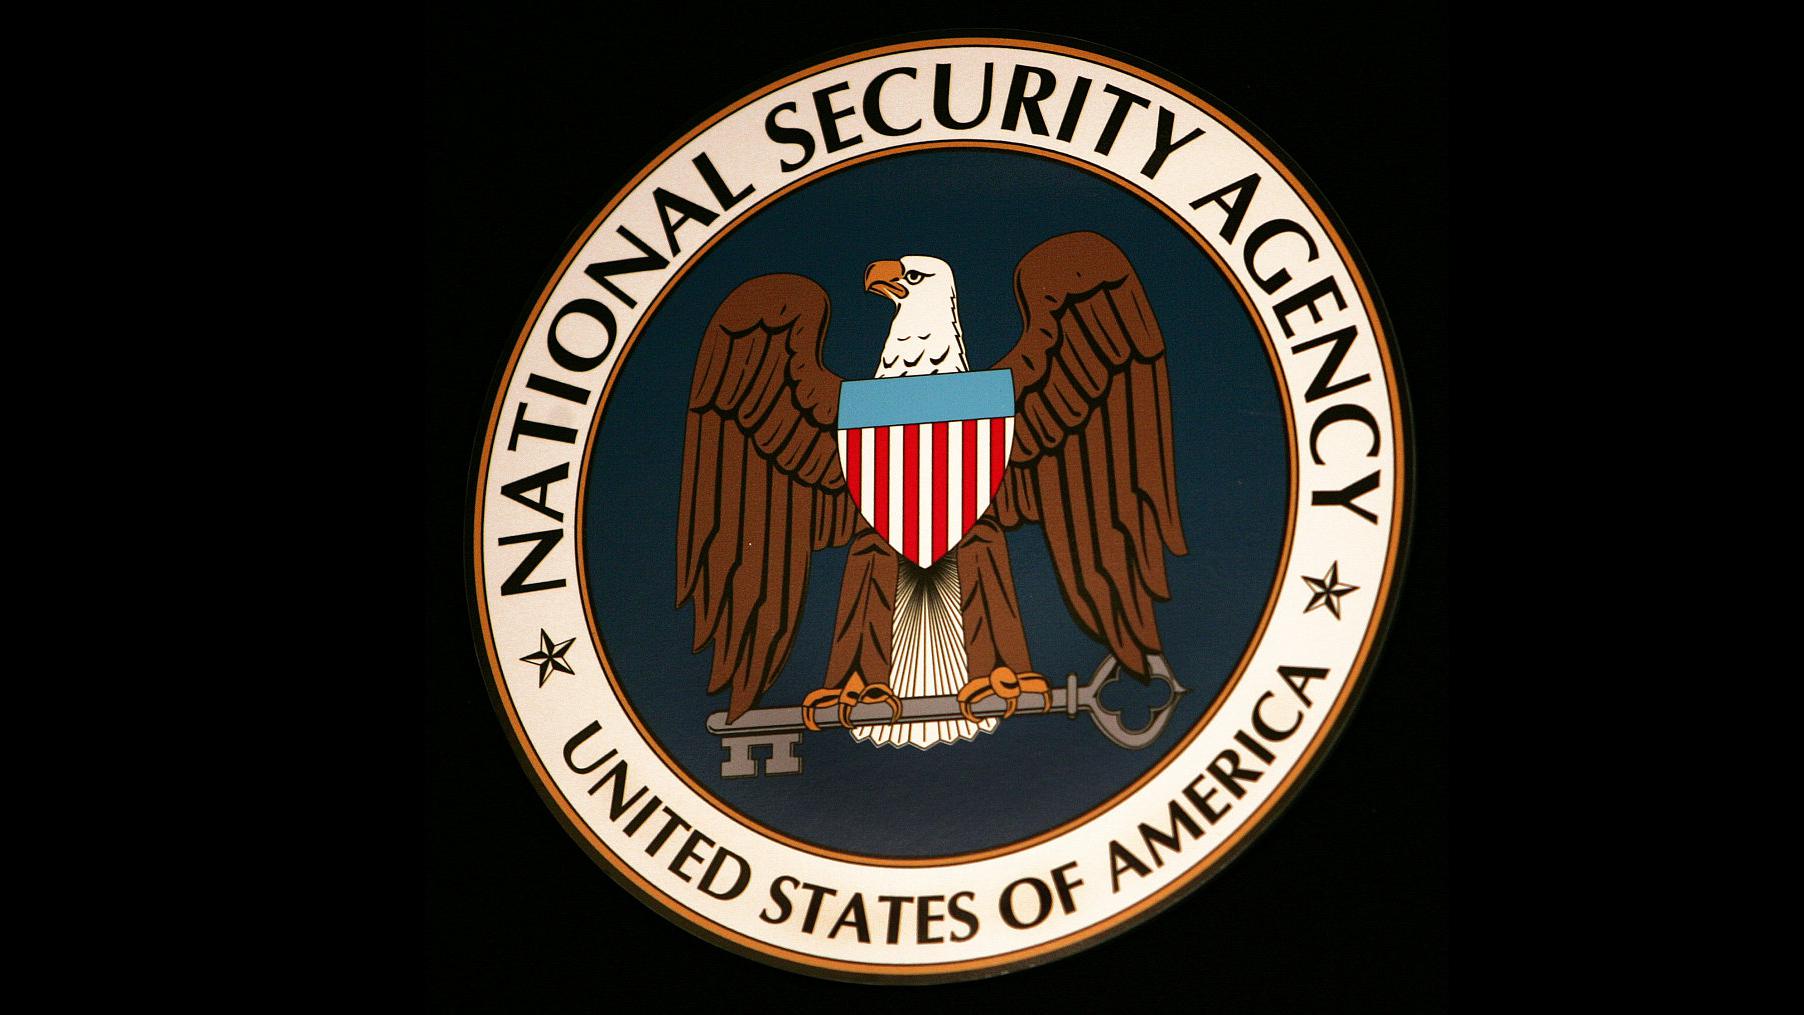 The logo of the U.S. National Security Agency. /CFP